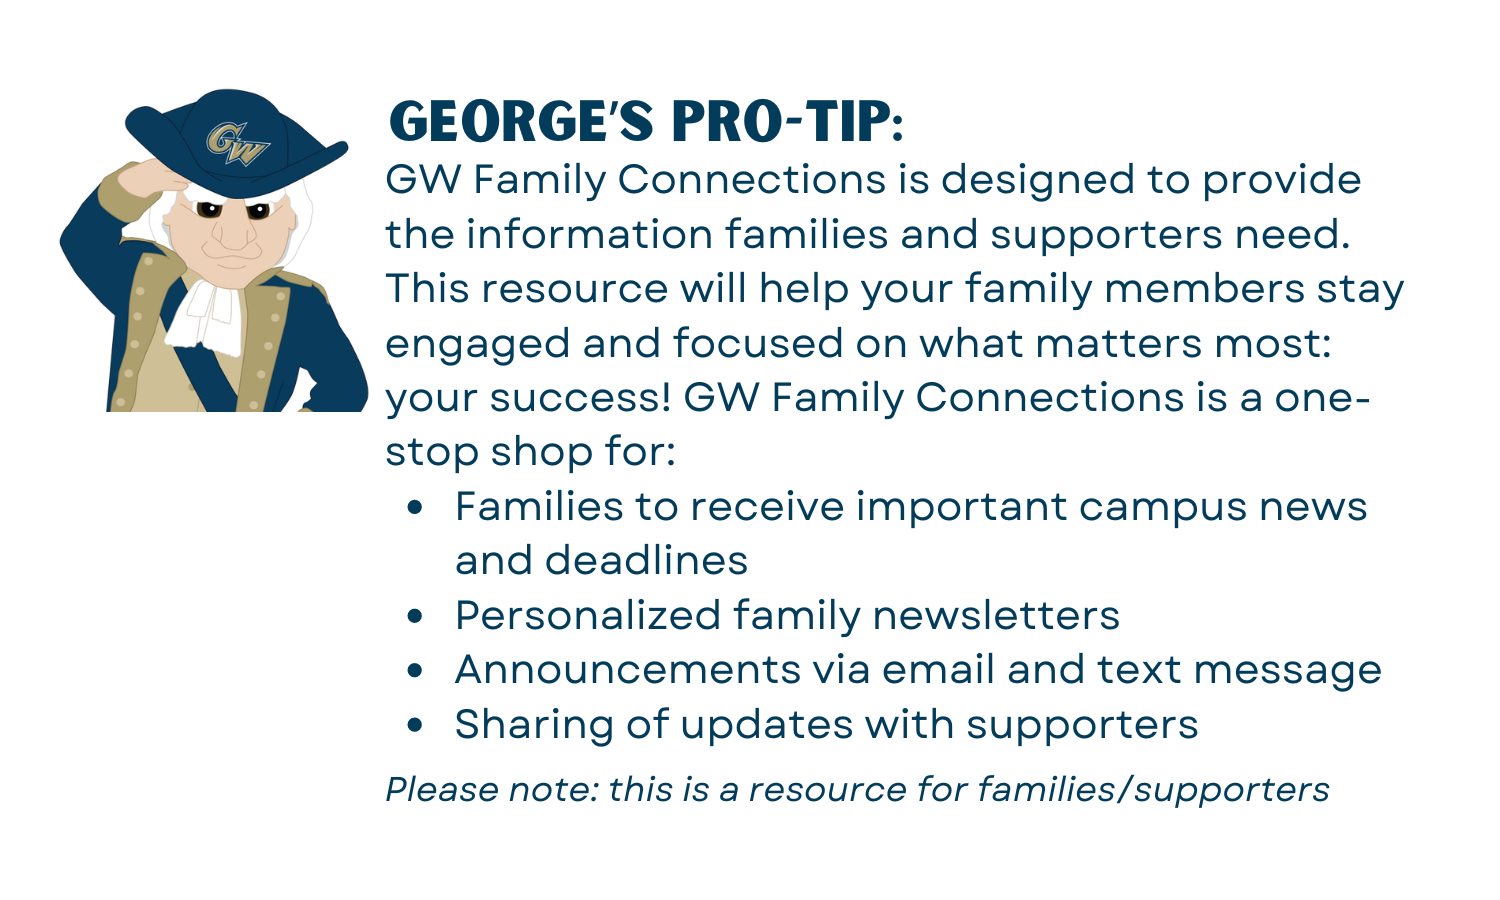 Information about GW Family Connections. This resource will help your family members stay engaged and focused on what matters most: your success!